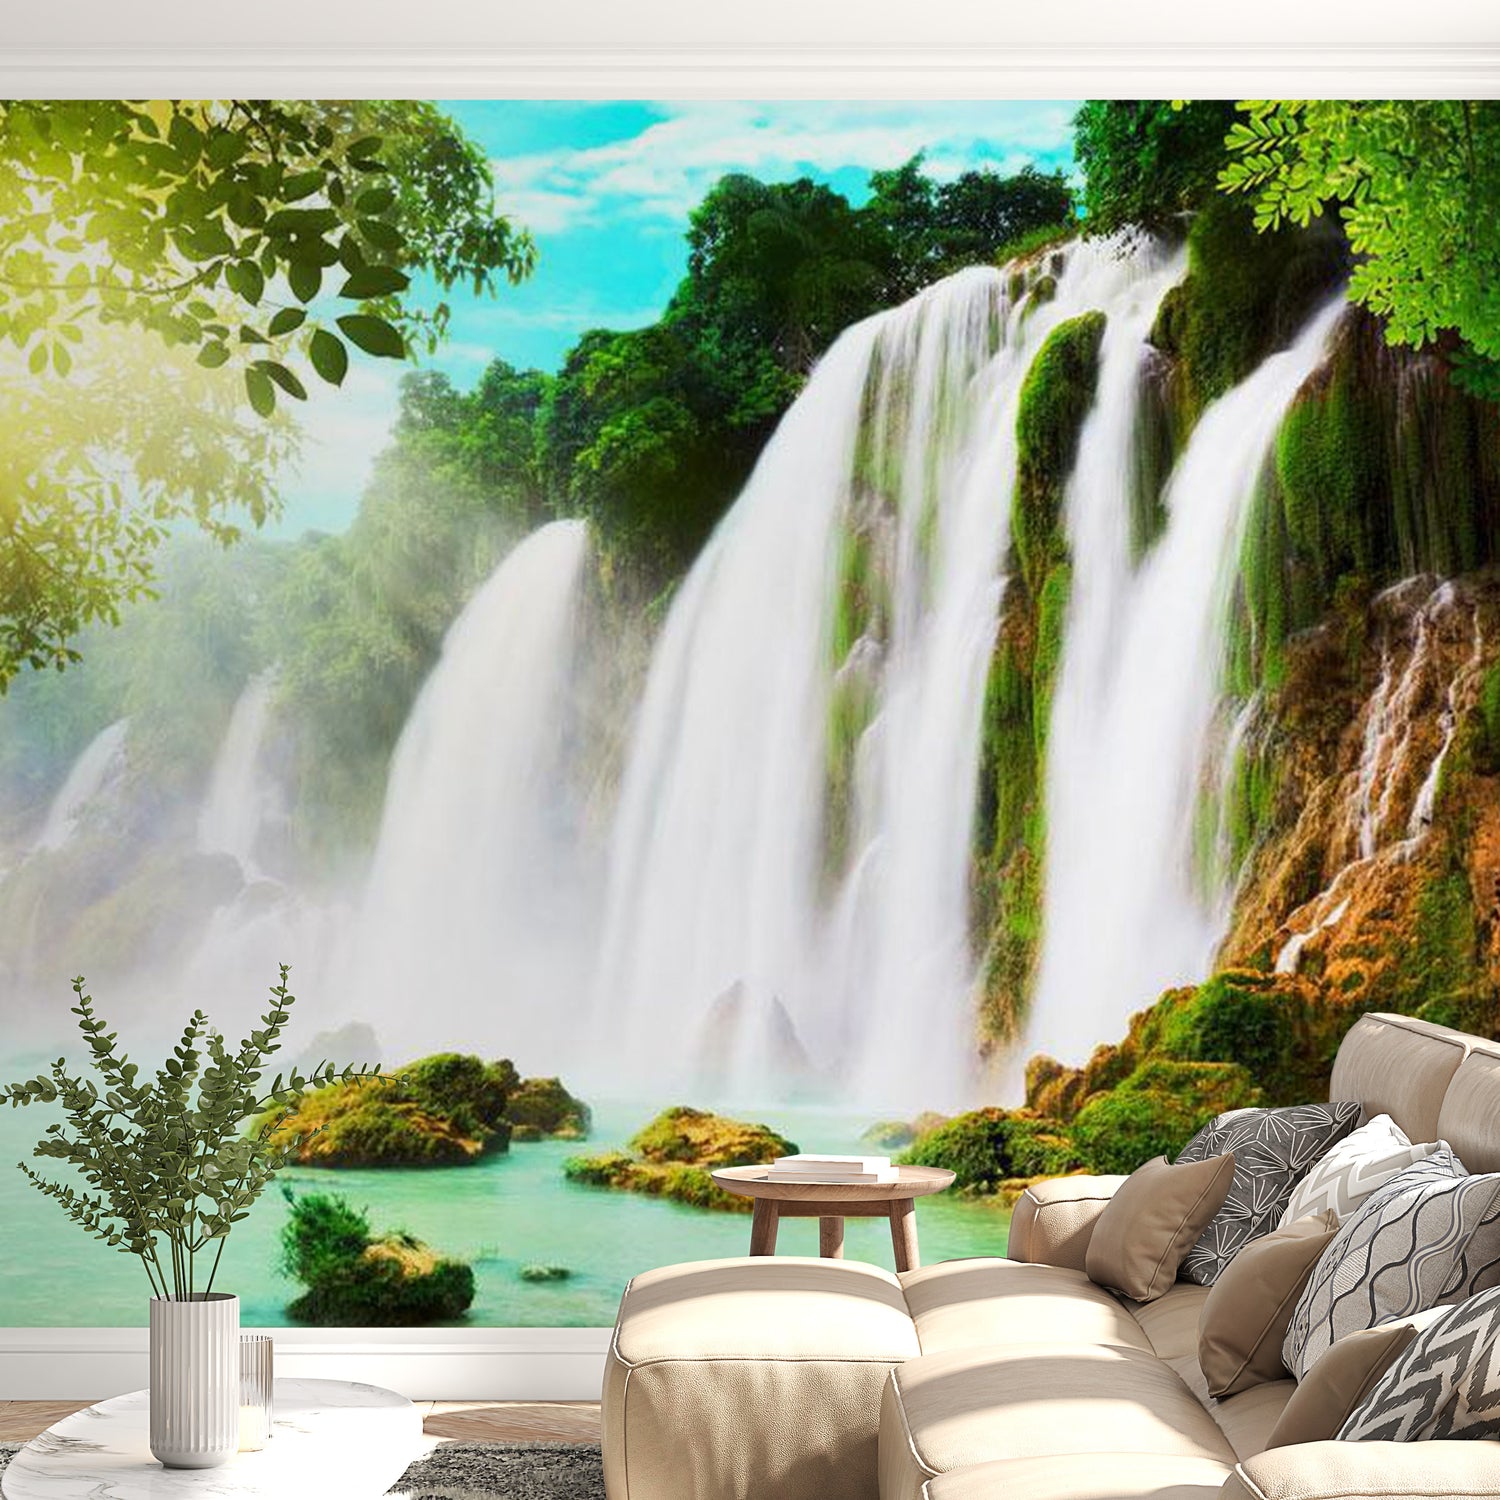 Peel & Stick Nature Wall Mural - The Beauty Of Nature: Waterfall - Removable Wall Decals